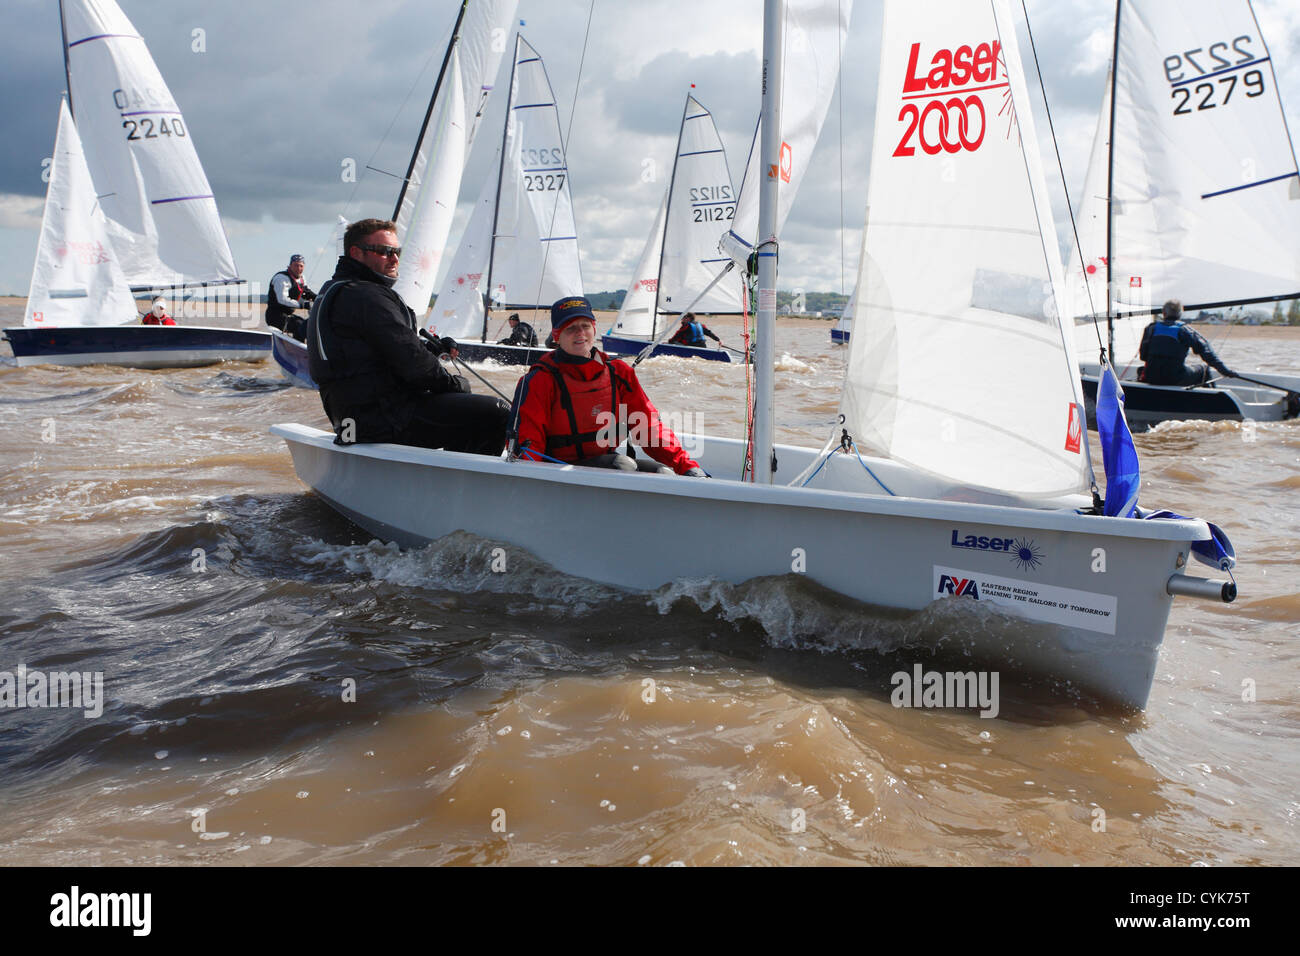 Couple sailing in Laser 2000 class meet at Snettisham in Norfolk. Stock Photo